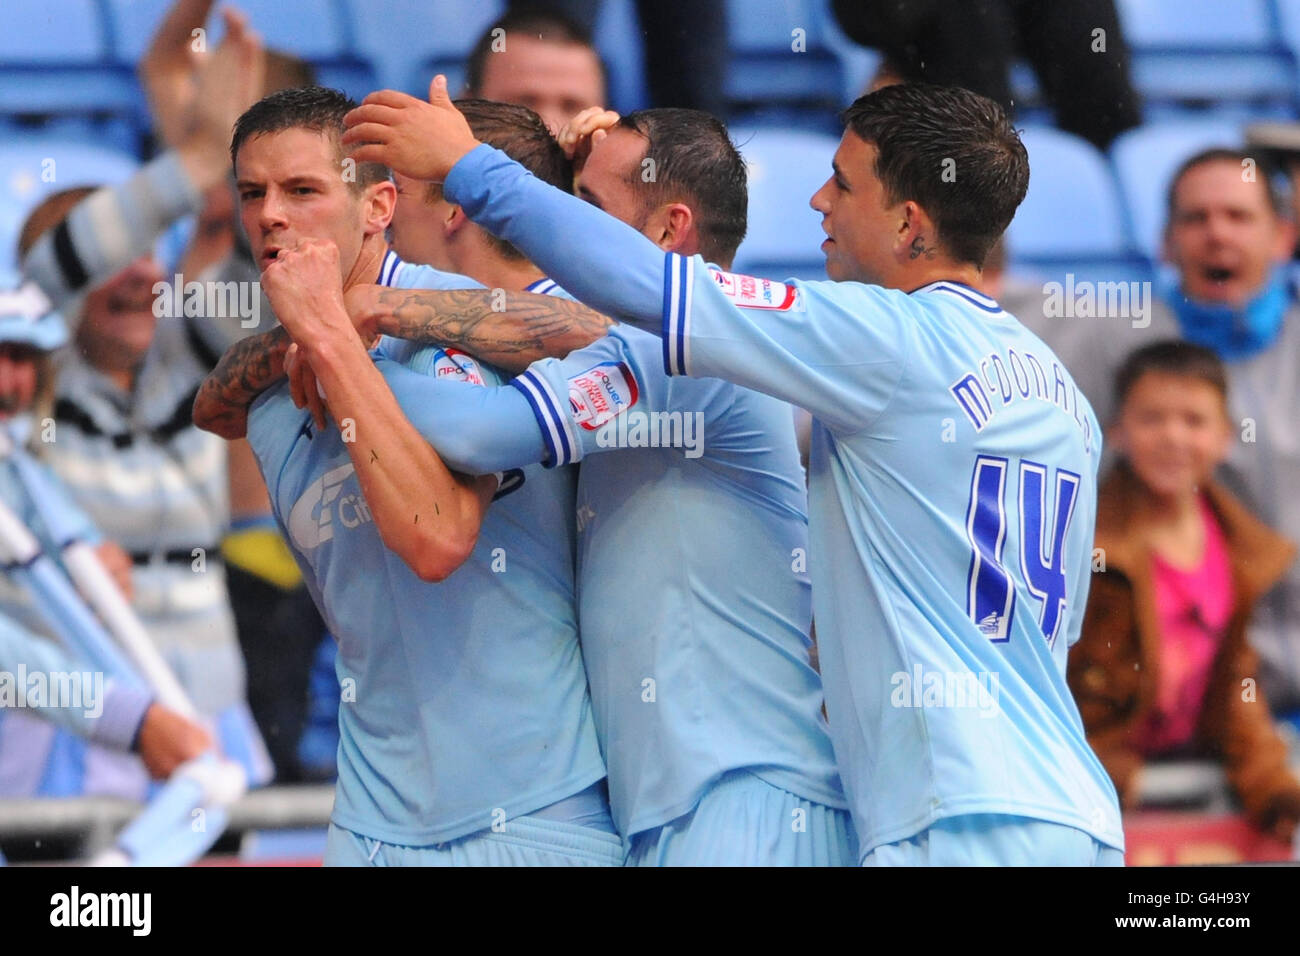 Coventry City's Lukas Jutkiewicz (left) celebrates scoring from the penalty spot during the npower Football League Championship match at the Ricoh Arena, Coventry. Stock Photo